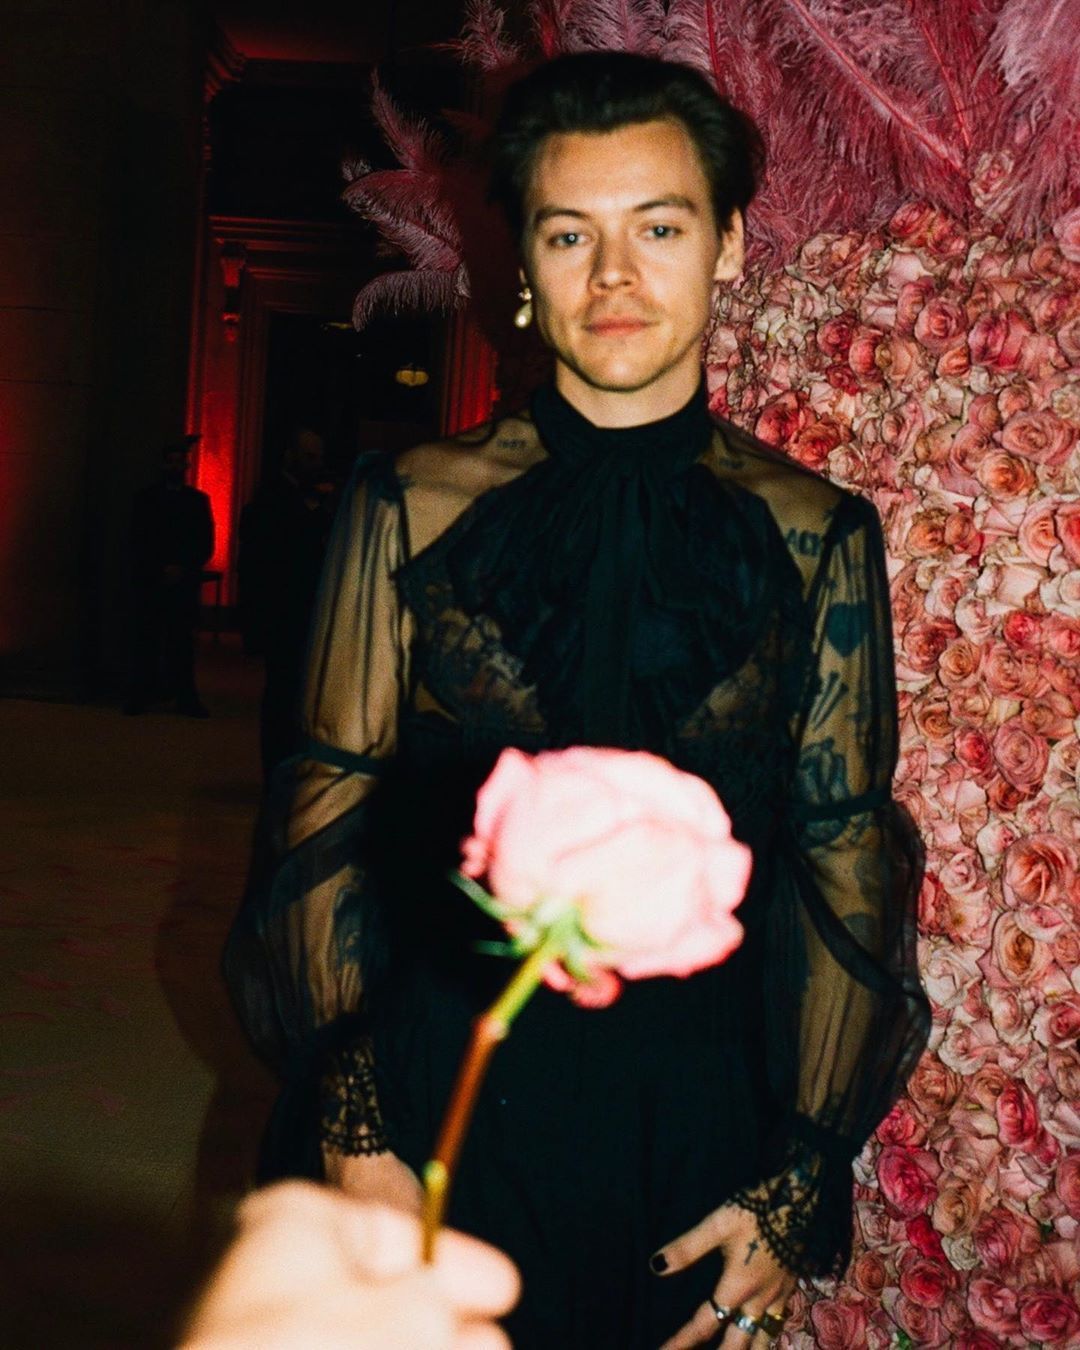 Vogue on Instagram: “A rose for #MetGala cohost and his single pearl earring. Tap the link. Harry styles picture, Harry styles photo, Harry styles